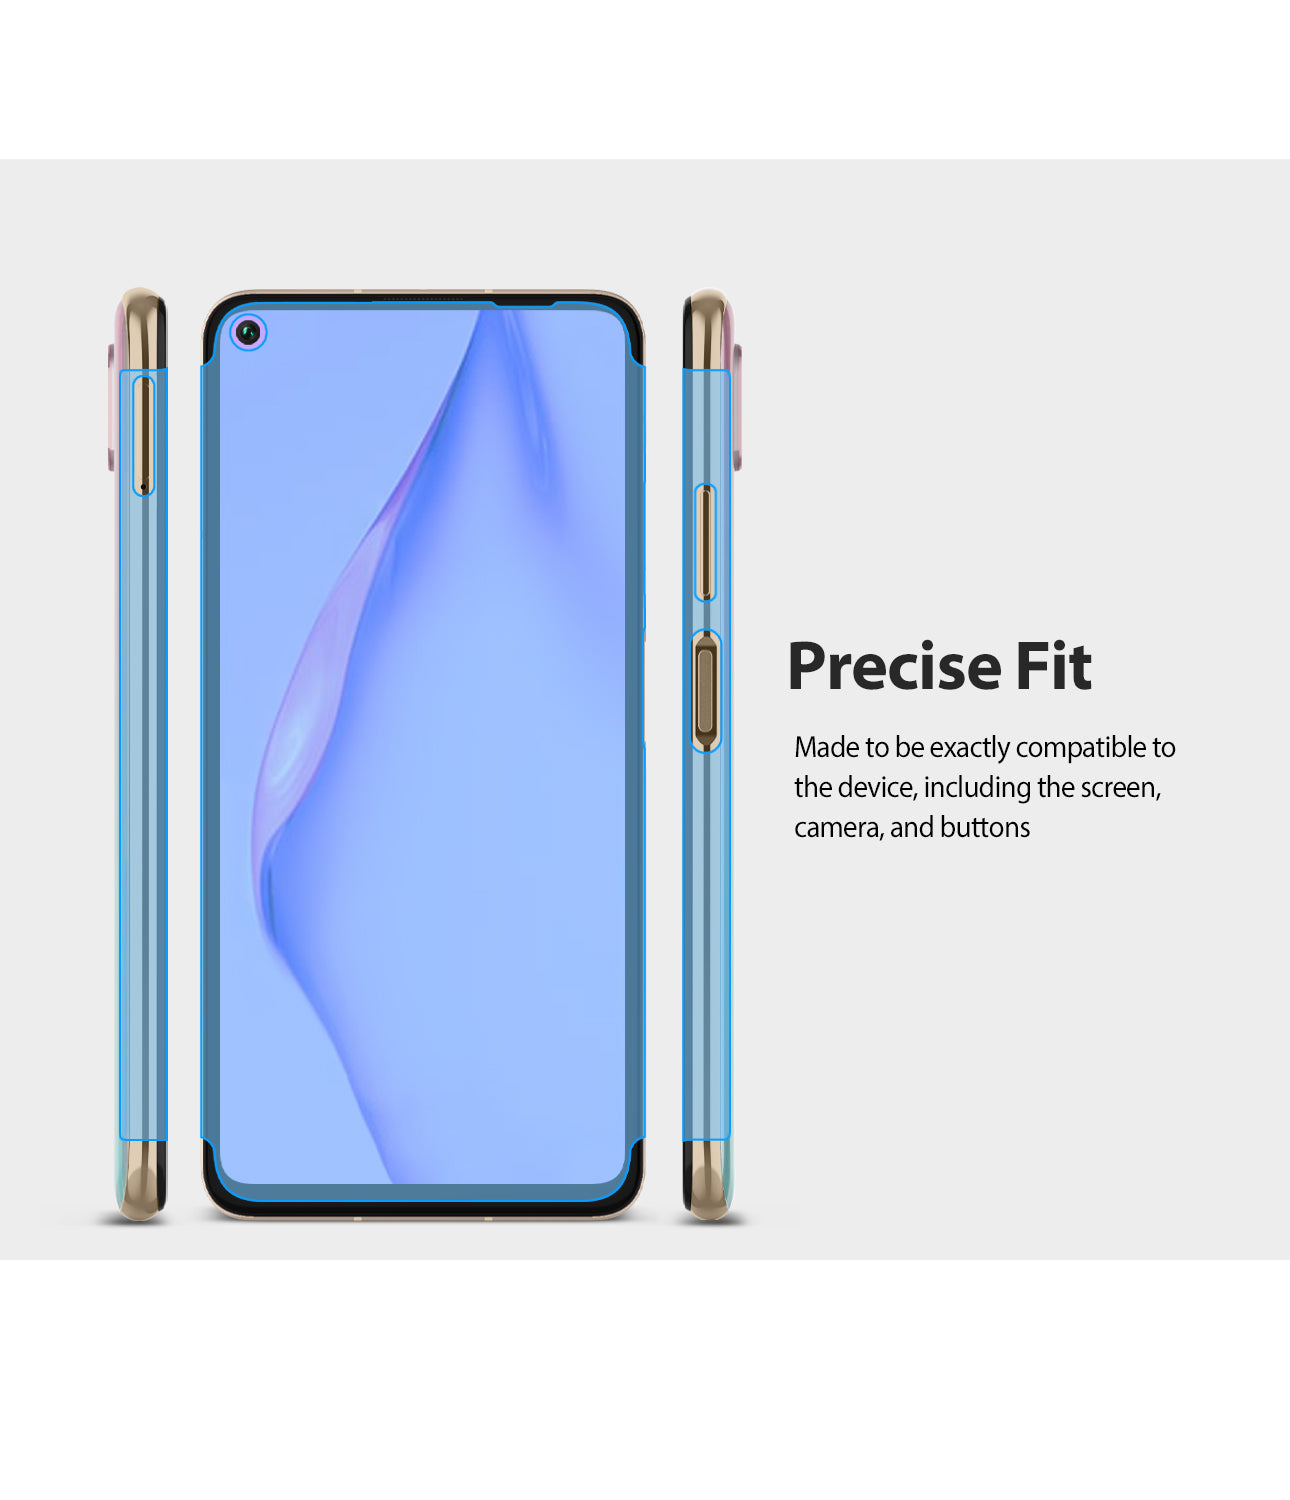 precise fit - wrap around the device for full protection